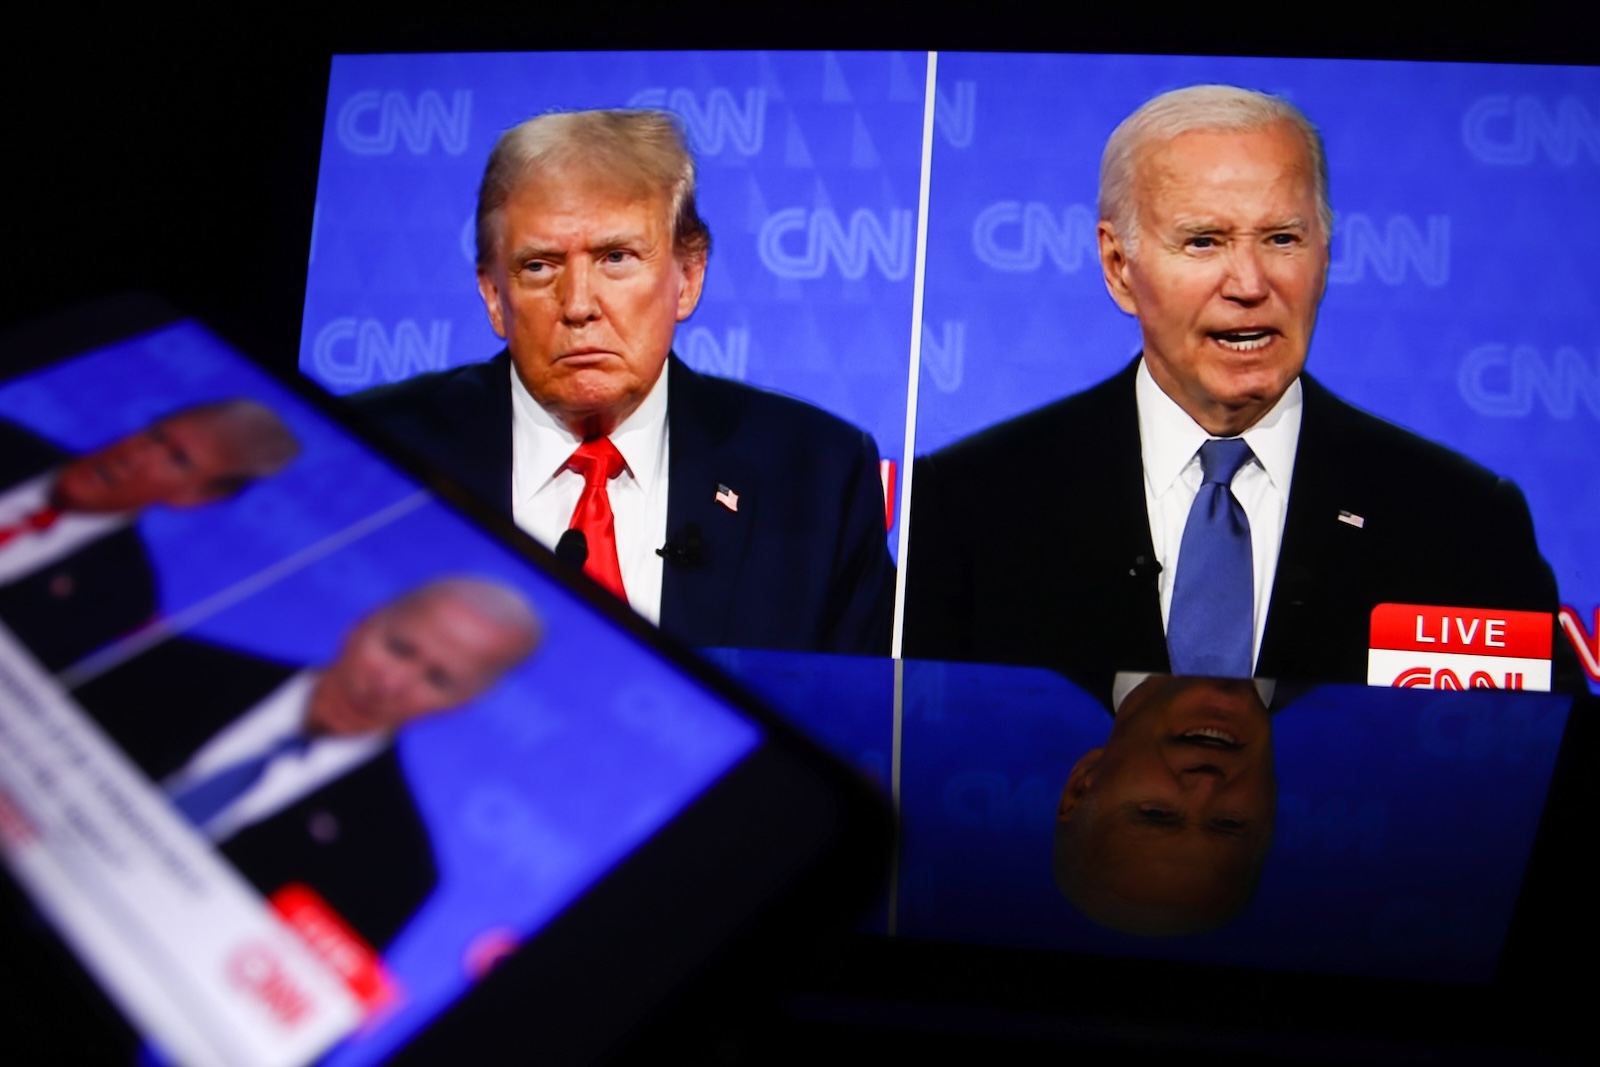 This photo taken from a screen shows the first presidential debate between US President Joe Biden and former President Donald Trump in the CNN studio in Atlanta. The first pre-election debate between current US President Joe Biden and Republican presidential candidate Donald Trump will be held on June 27 without spectators or reporters in the CNN studio in Atlanta.